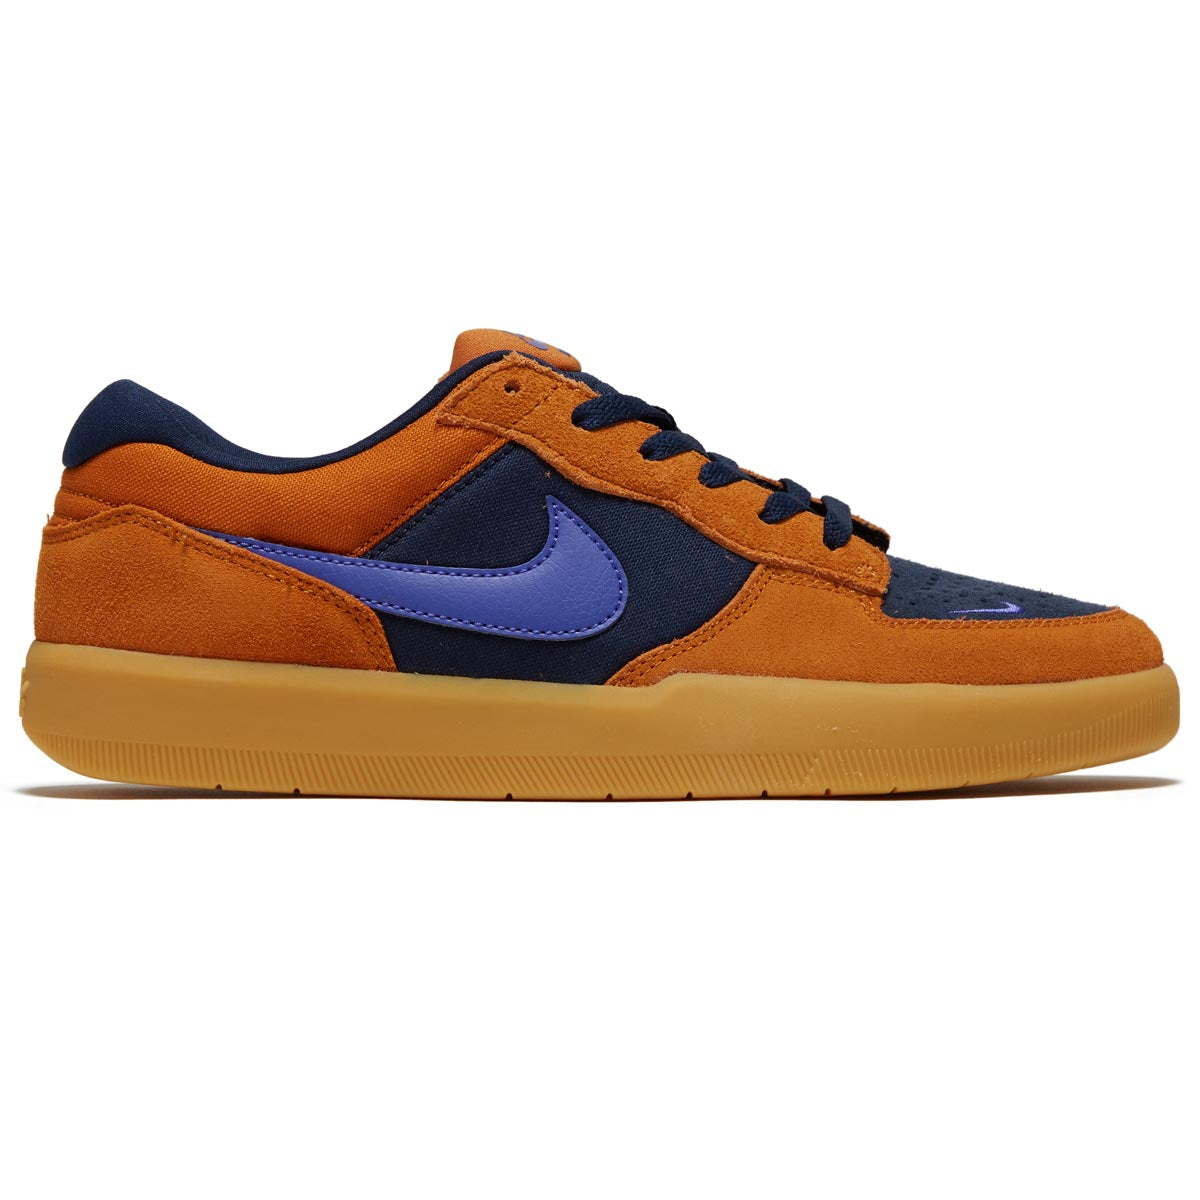 Nike SB Force 58 Shoes - Monarch/Persian Violet/Midnight Navy image 1